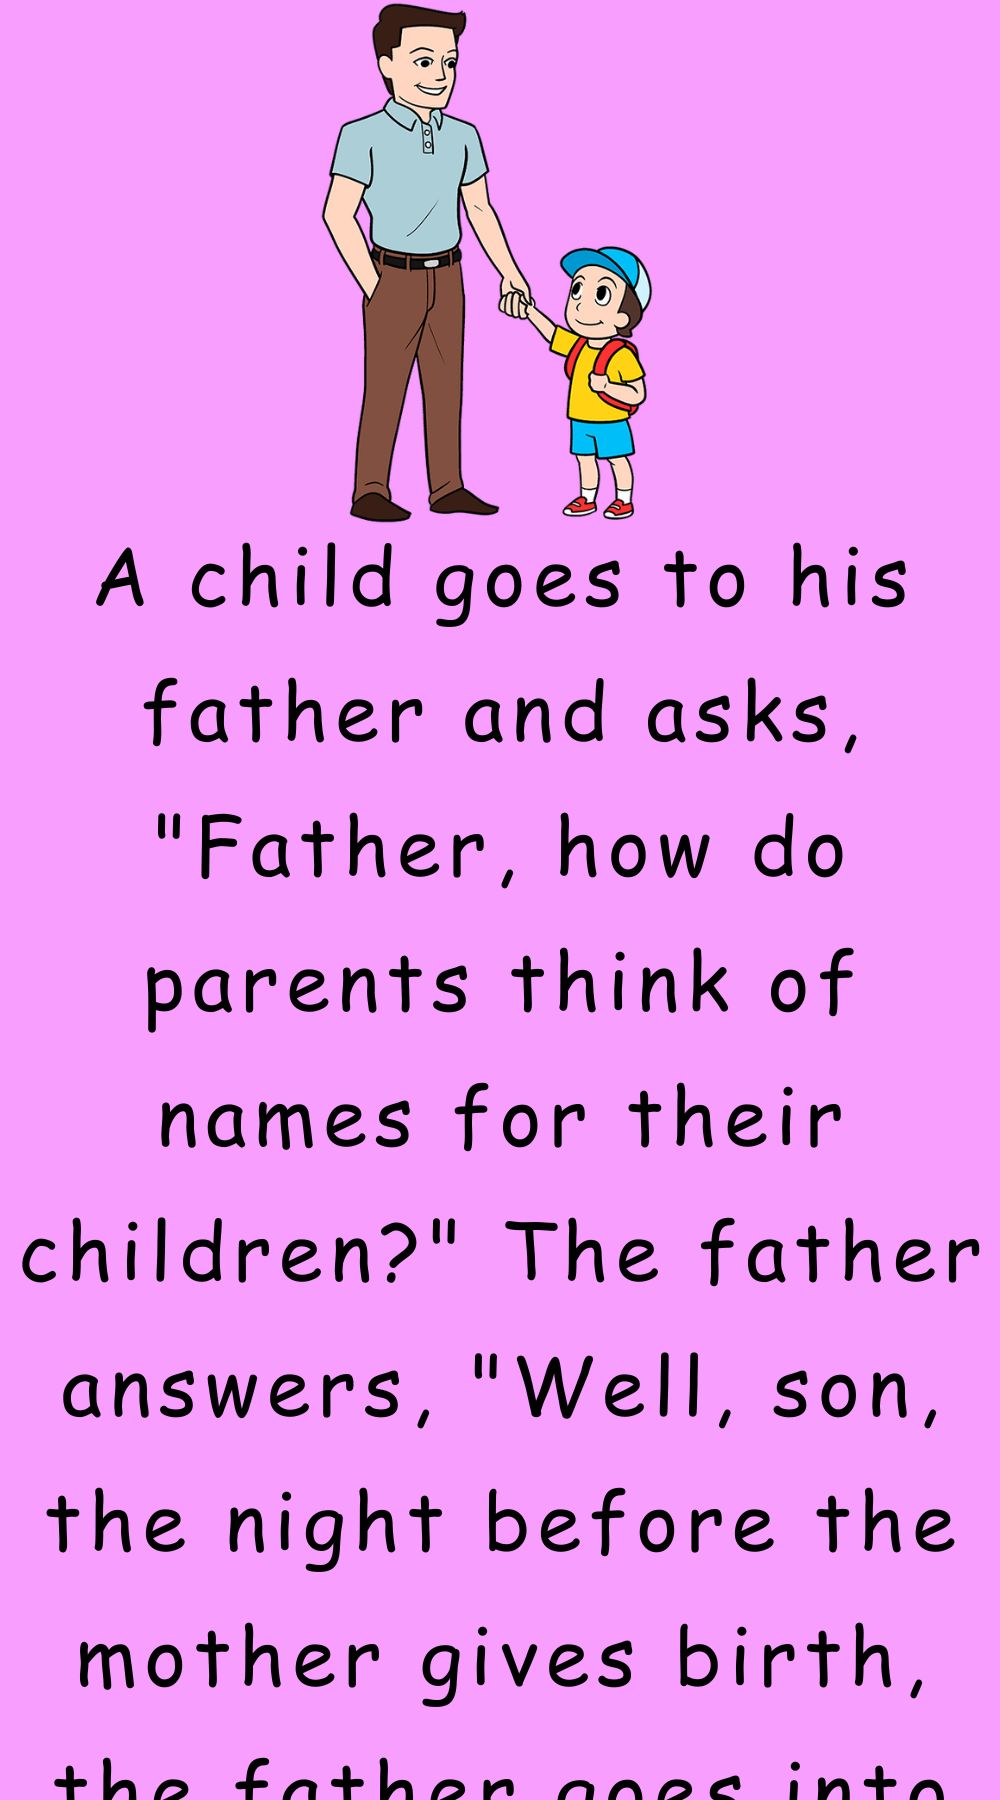 A child goes to his father and asks